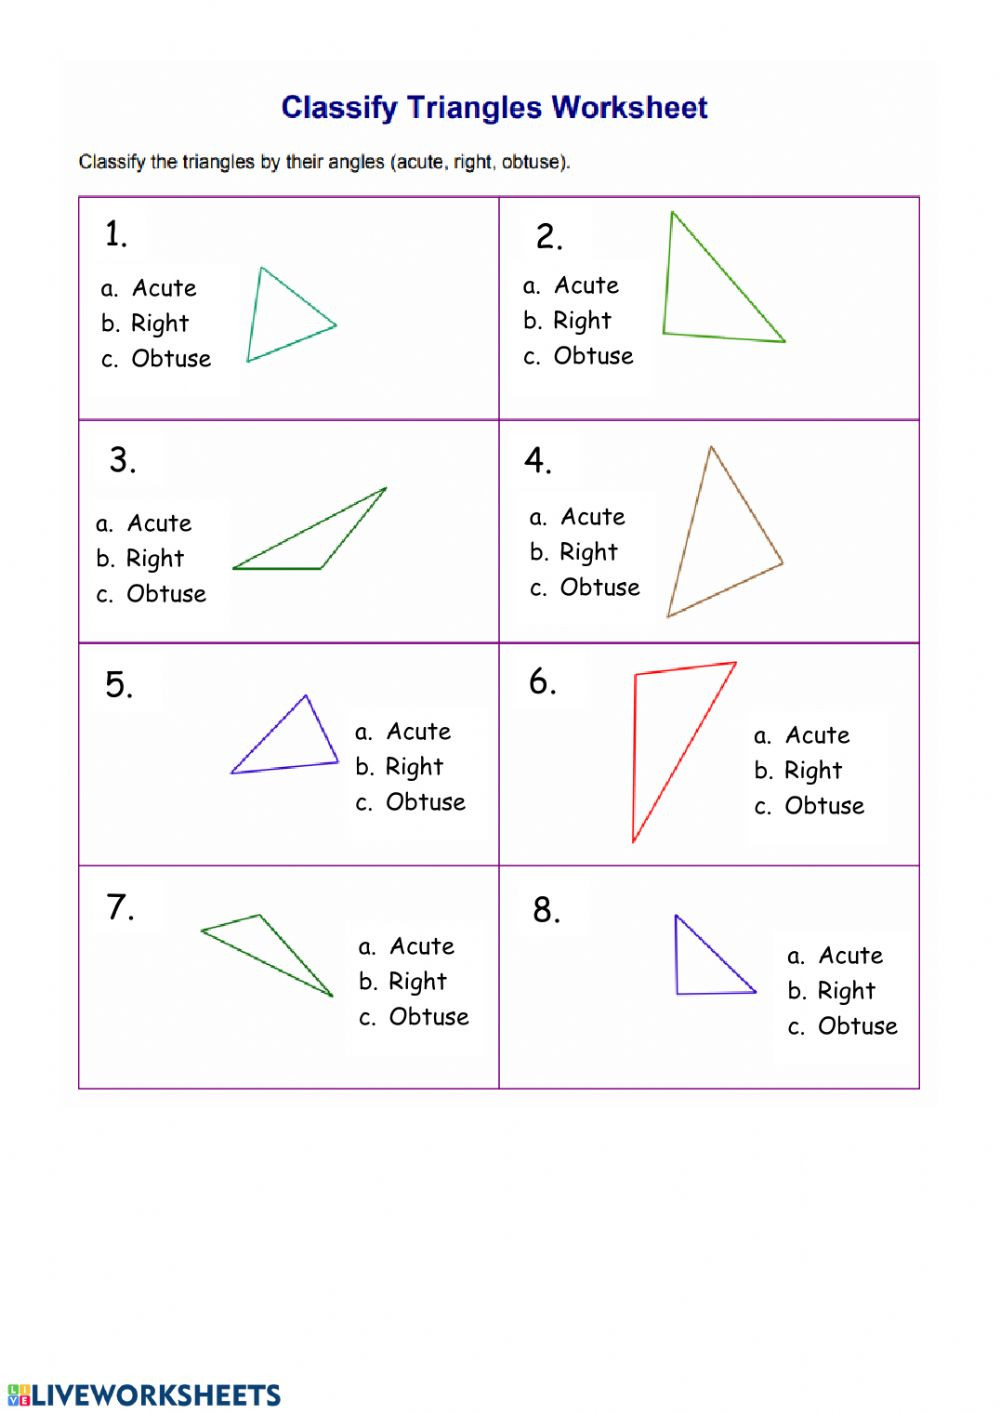 Angles In A Triangle Worksheet Classify Triangles Interactive Worksheet